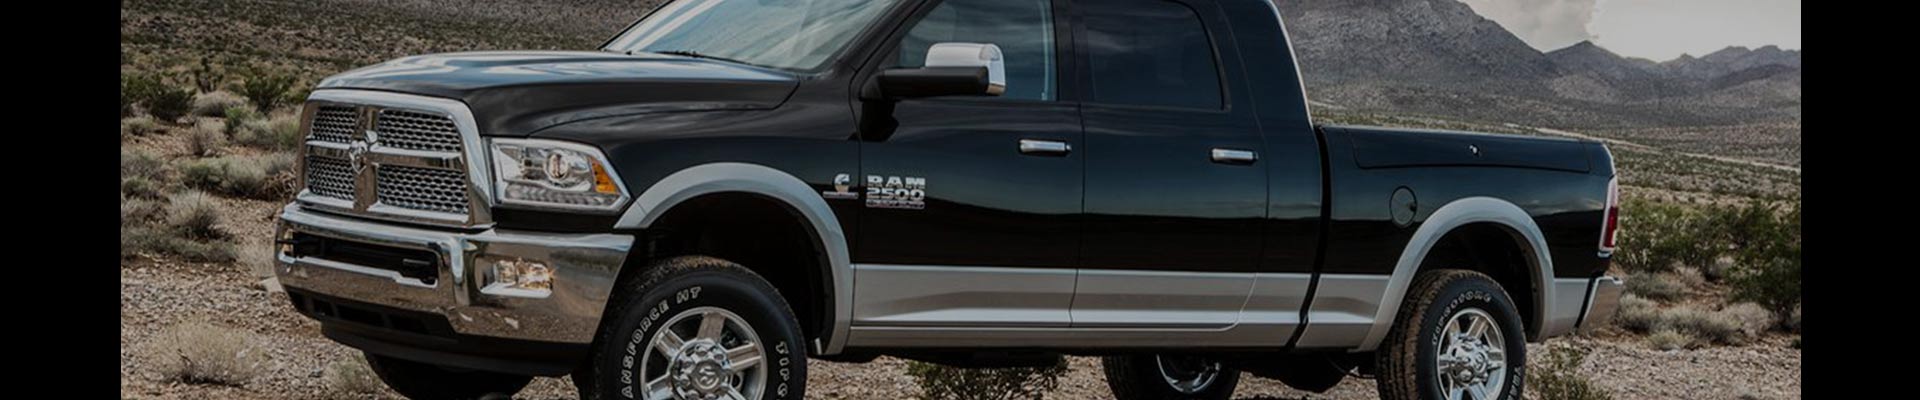 Shop Replacement and OEM 2014 Ram 2500 Parts with Discounted Price on the Net